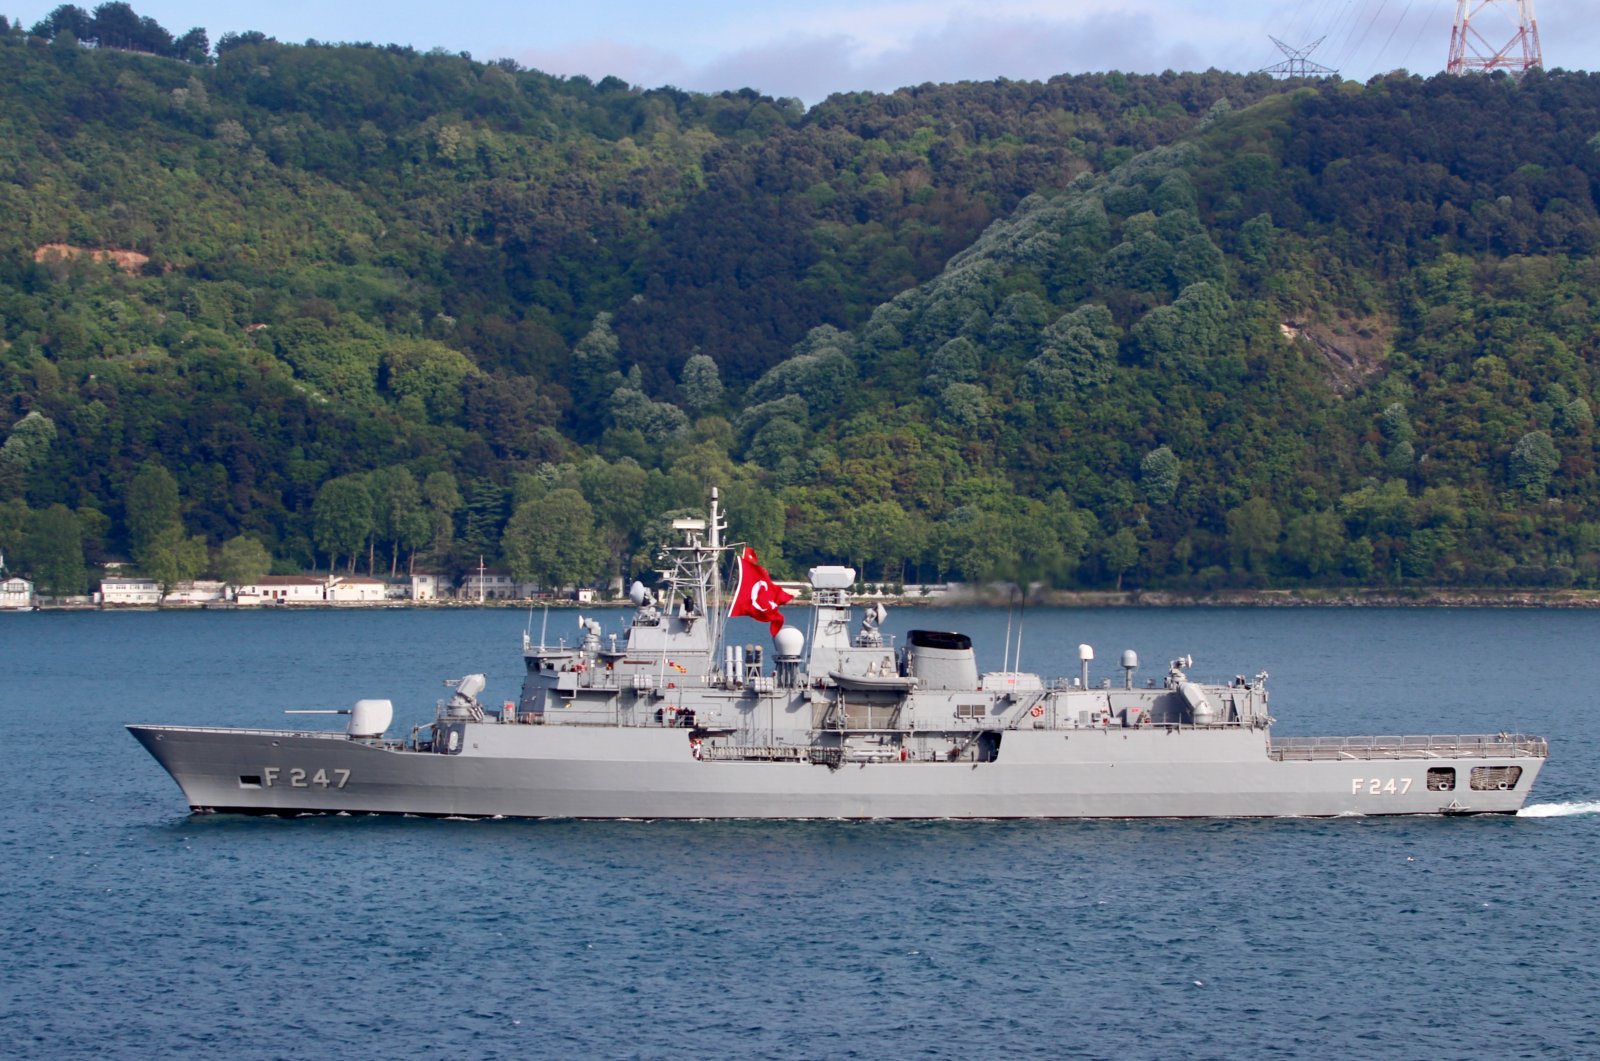 Turkish Navy frigate TCG Kemal Reis (F-247) is pictured in the Bosphorus strait in Istanbul, Turkey May 13, 2019. (Reuters File Photo)